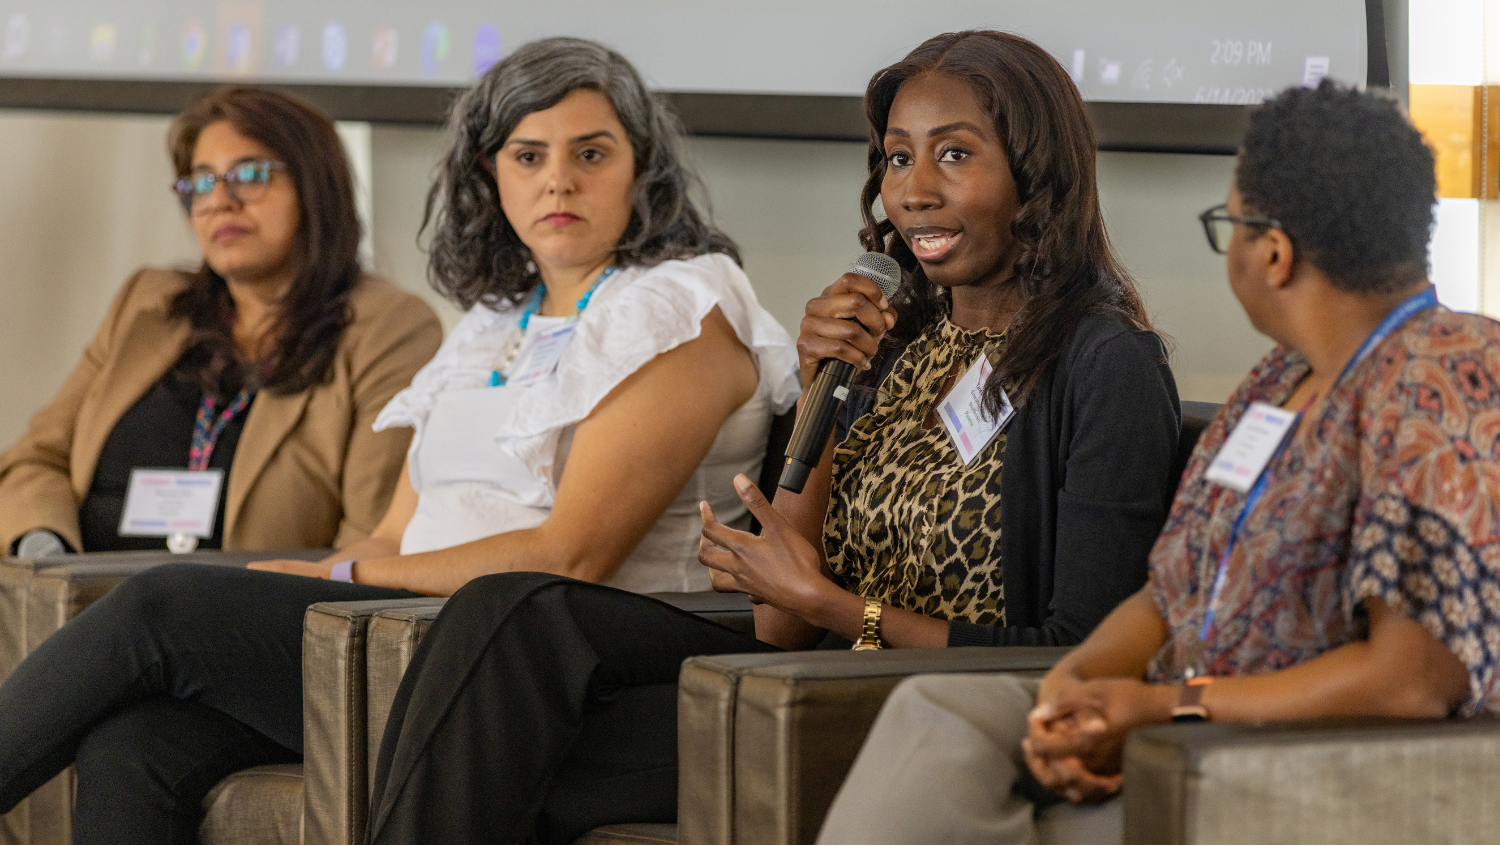 A Black woman with long brown hair is seated in a chair and speaking into a microphone. Two women sit to her right and one woman sits to her left. All of them are listening to her speak. 